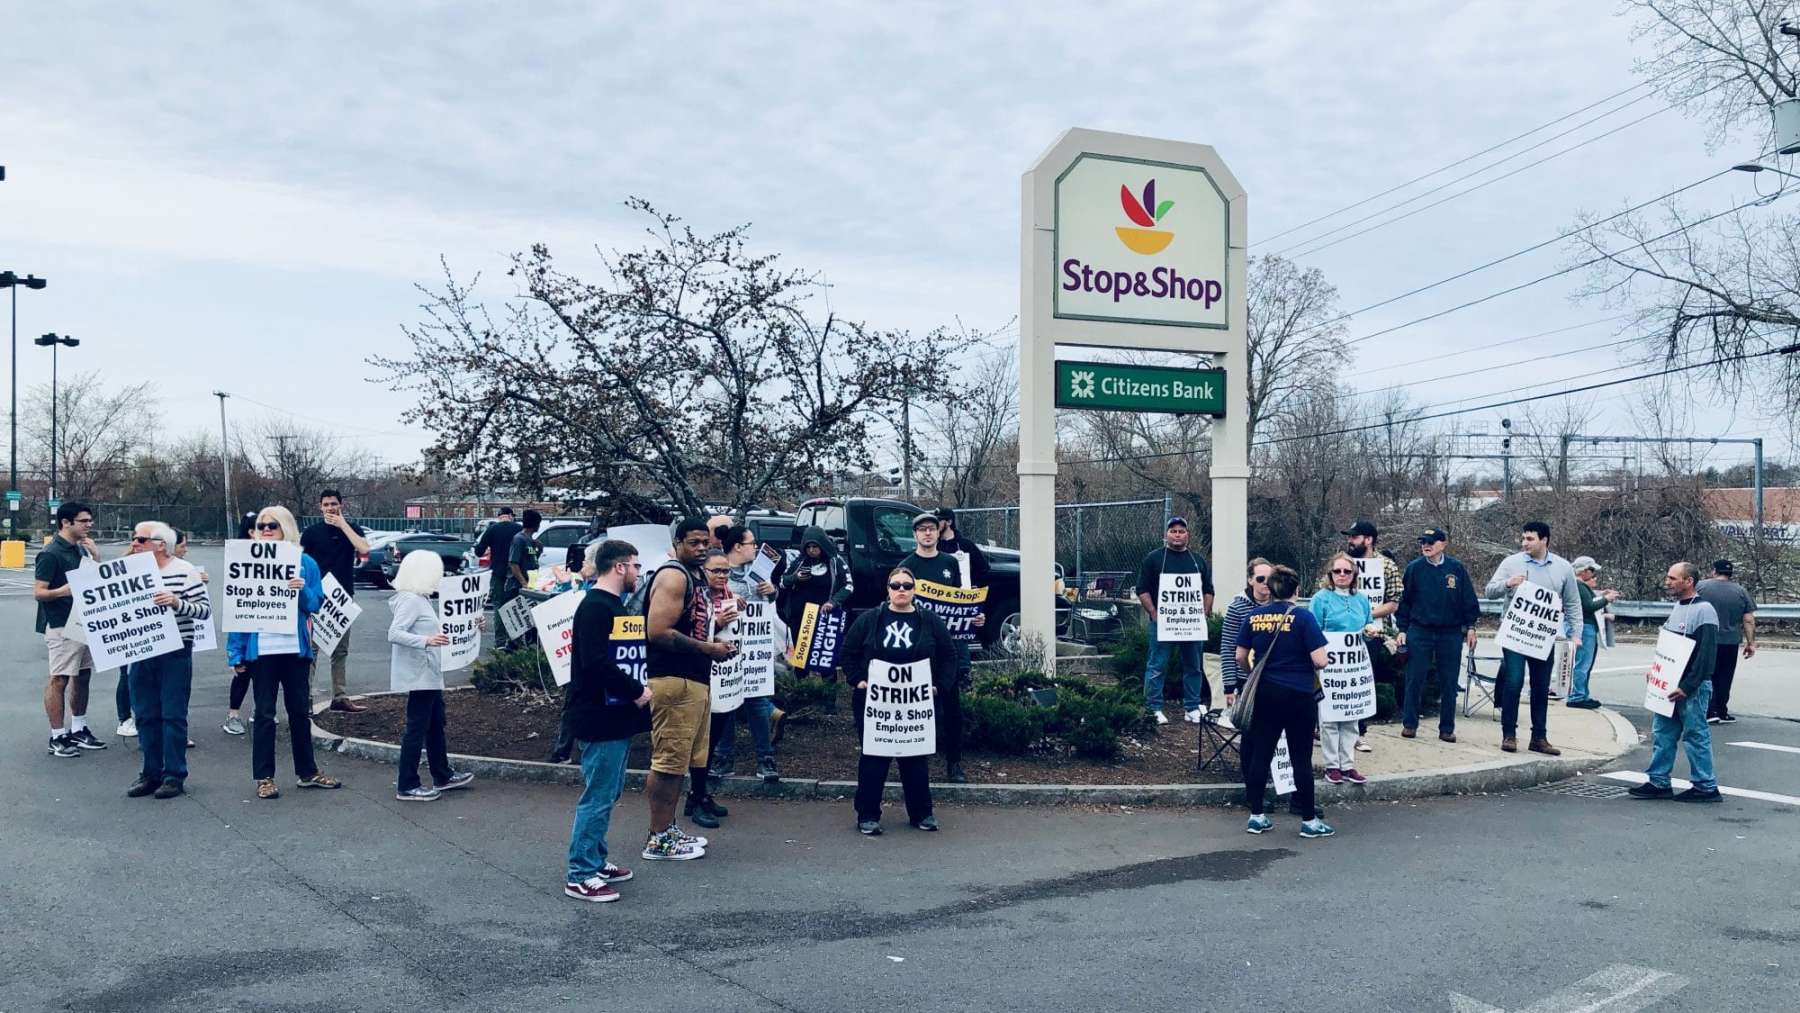 An overview of the Stop & Shop strike﻿